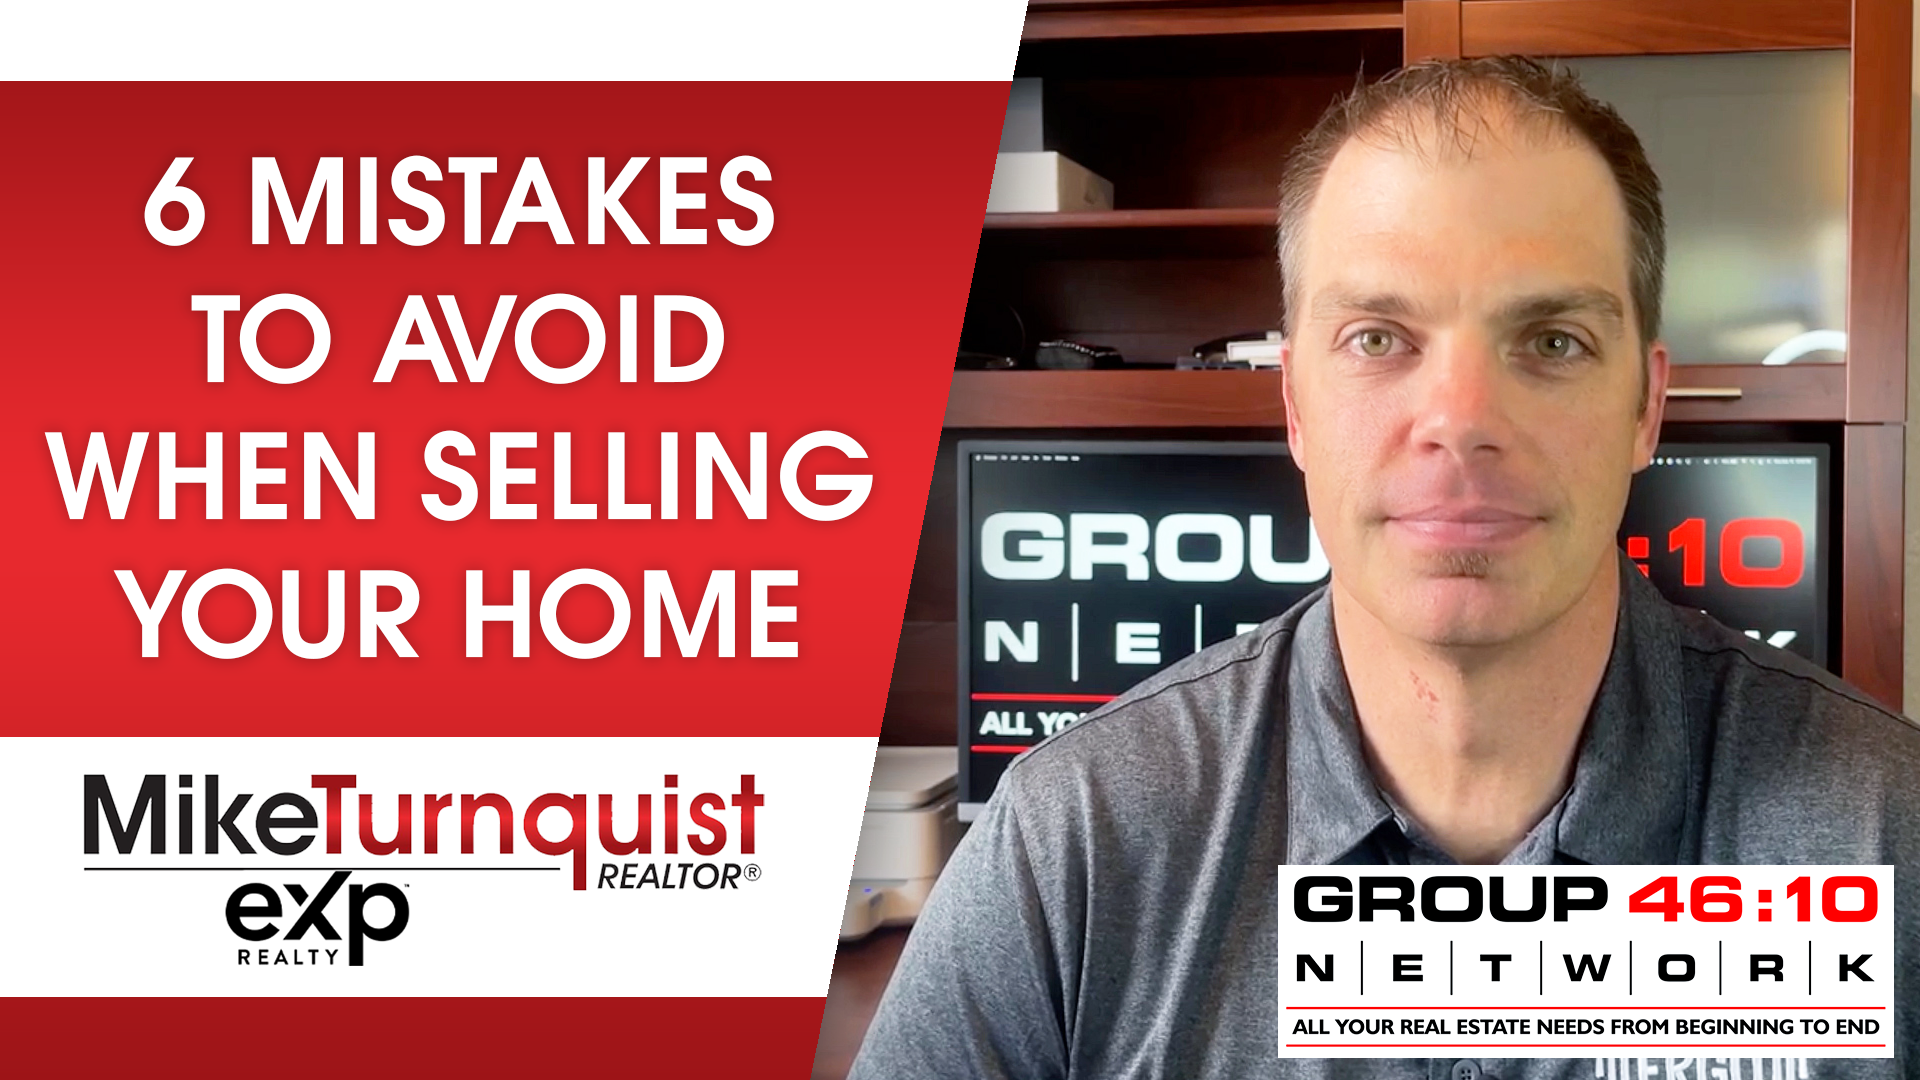 Avoid These 6 Mistakes When Selling Your Home